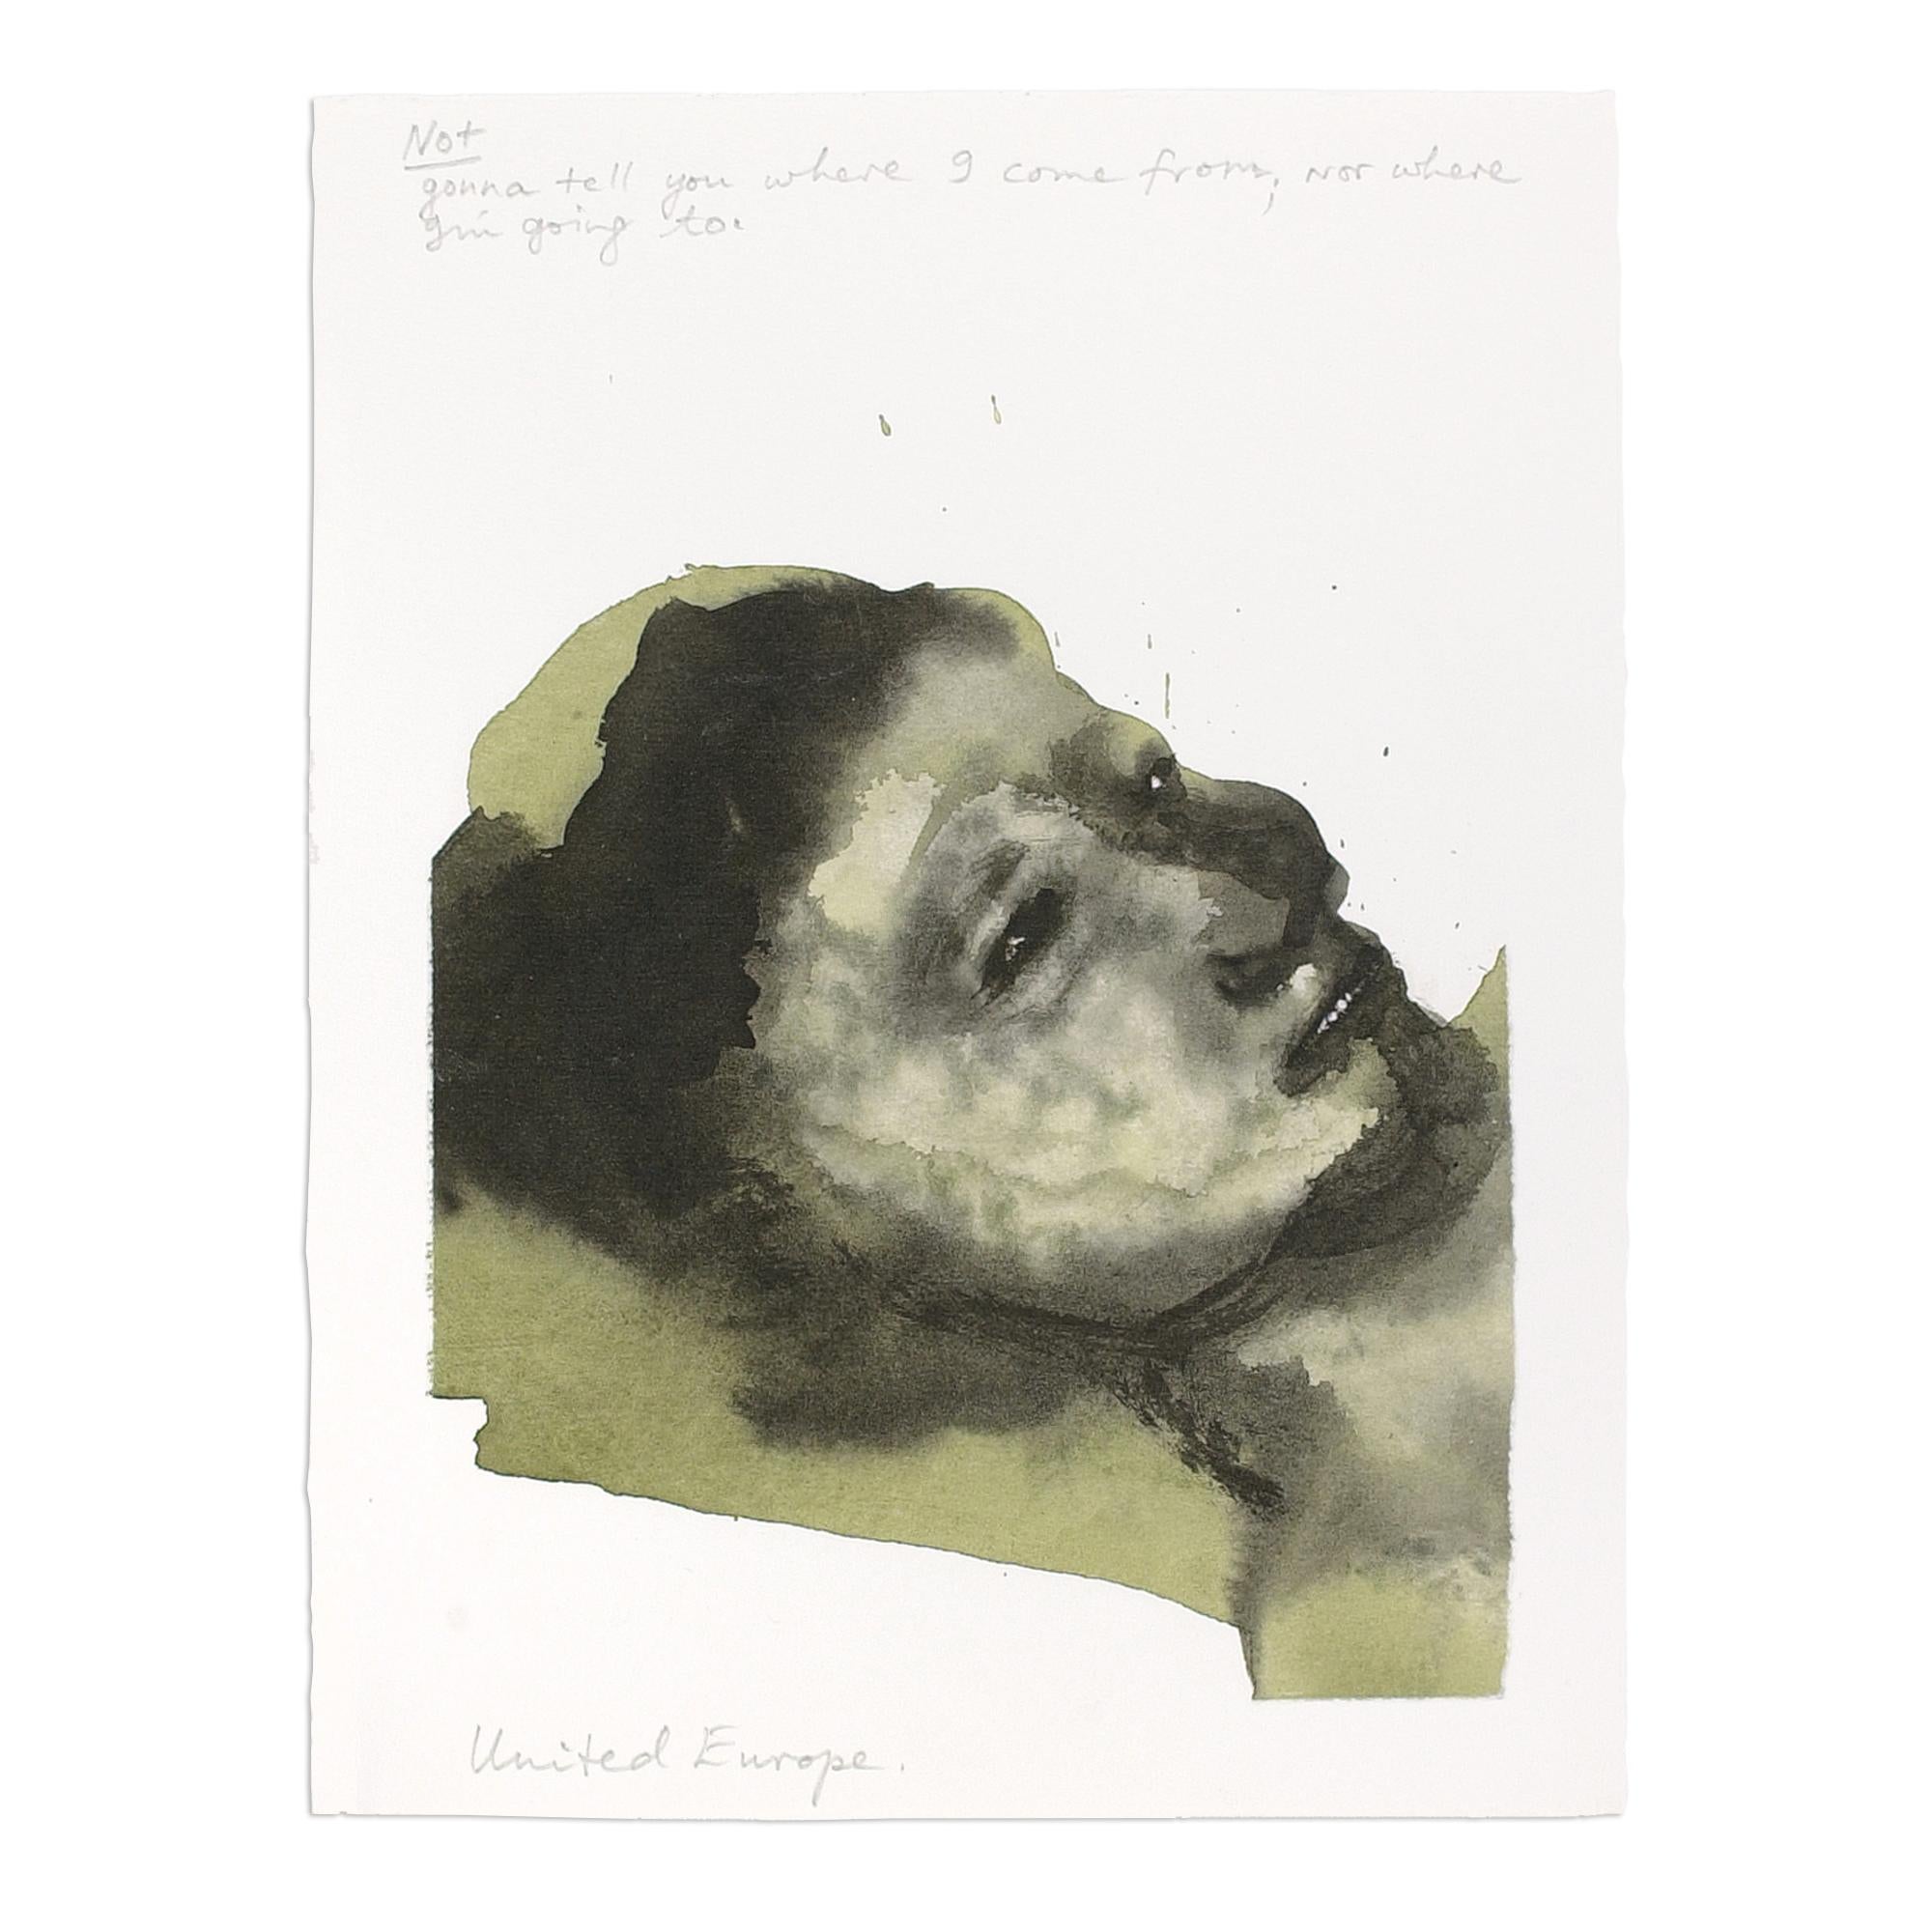 Marlene Dumas (South African, b. 1953)
United Europe, 2003/05
Medium: Digital pigment print on rag paper
Dimensions: 37 x 28 cm (14.5 x 11 in)
Edition of 75: Hand-signed and numbered
Condition: Mint